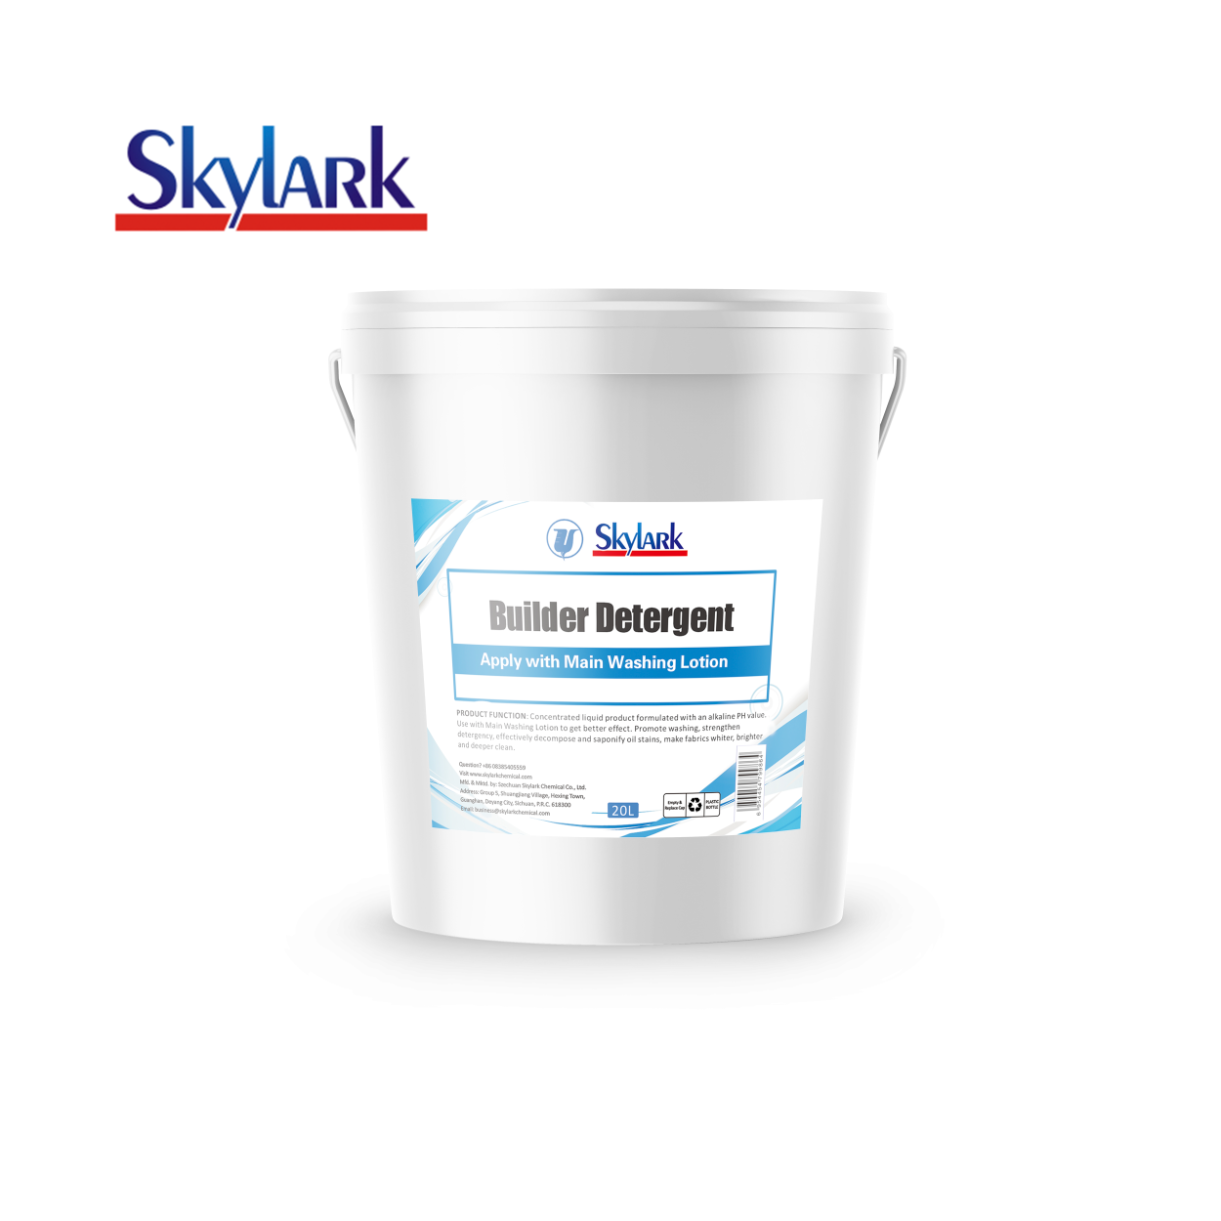  Professional Builder Detergent With Excellent Performance